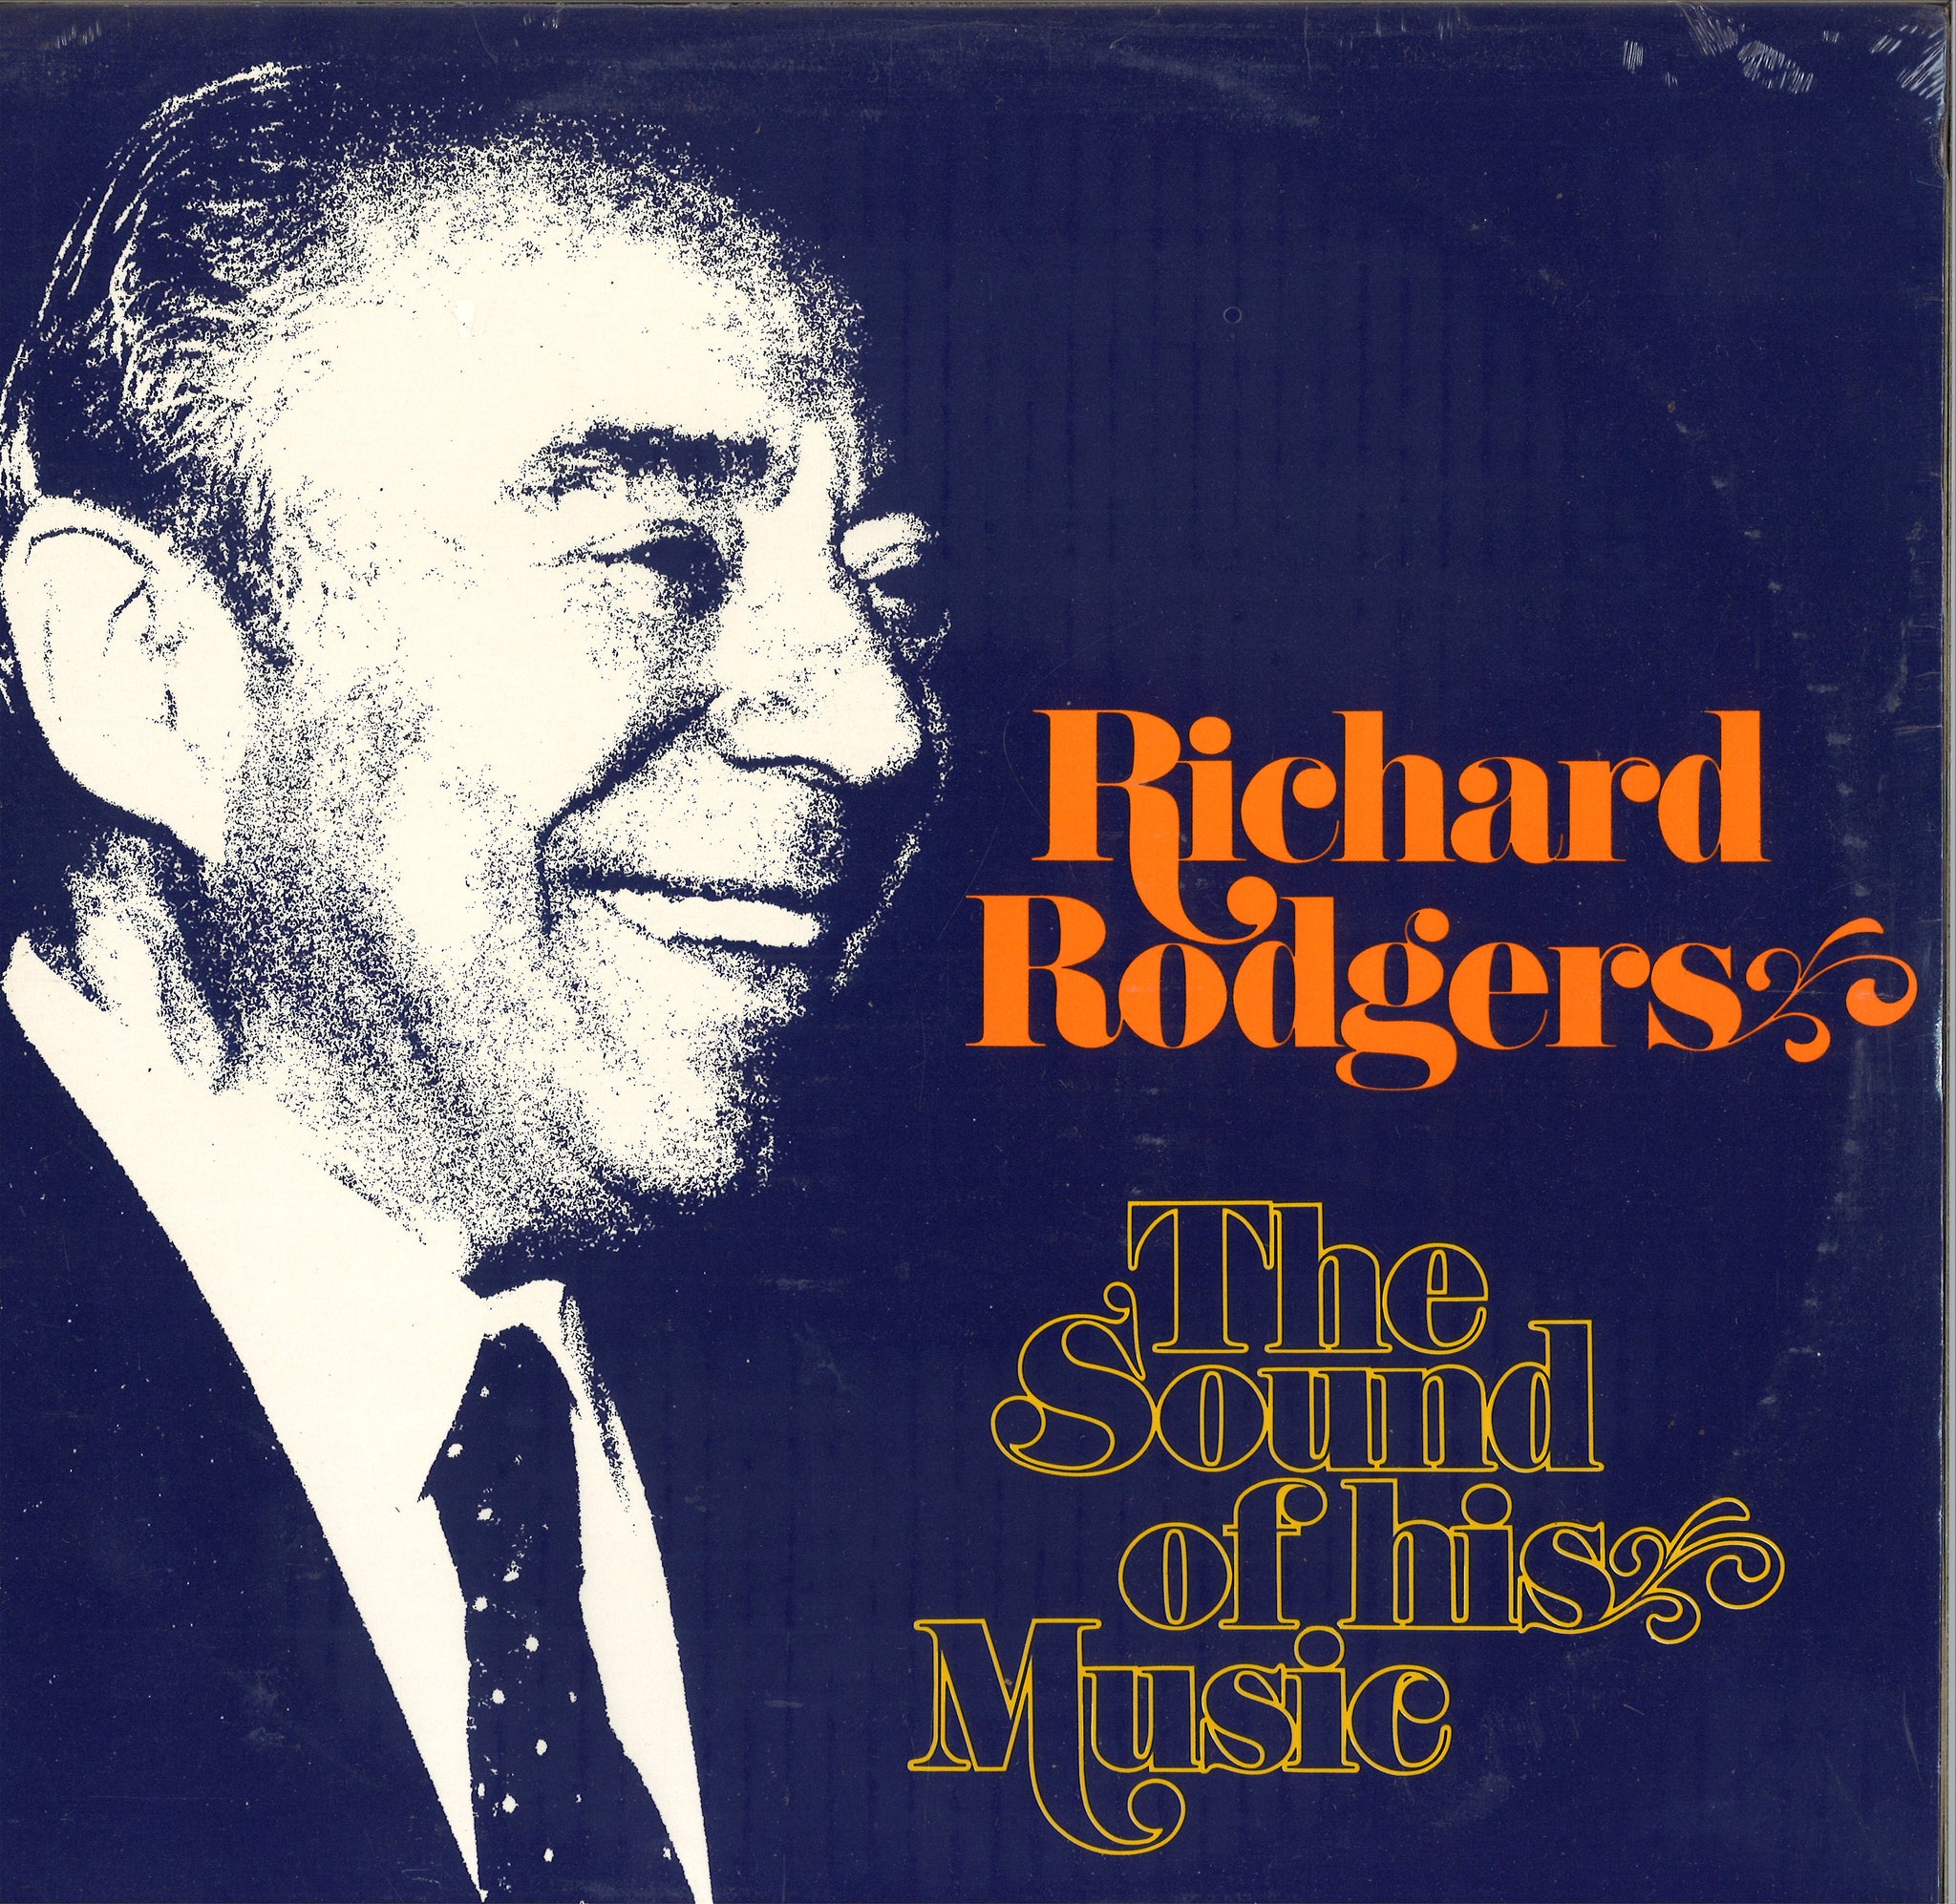 Richard Rodgers Sound of His Music